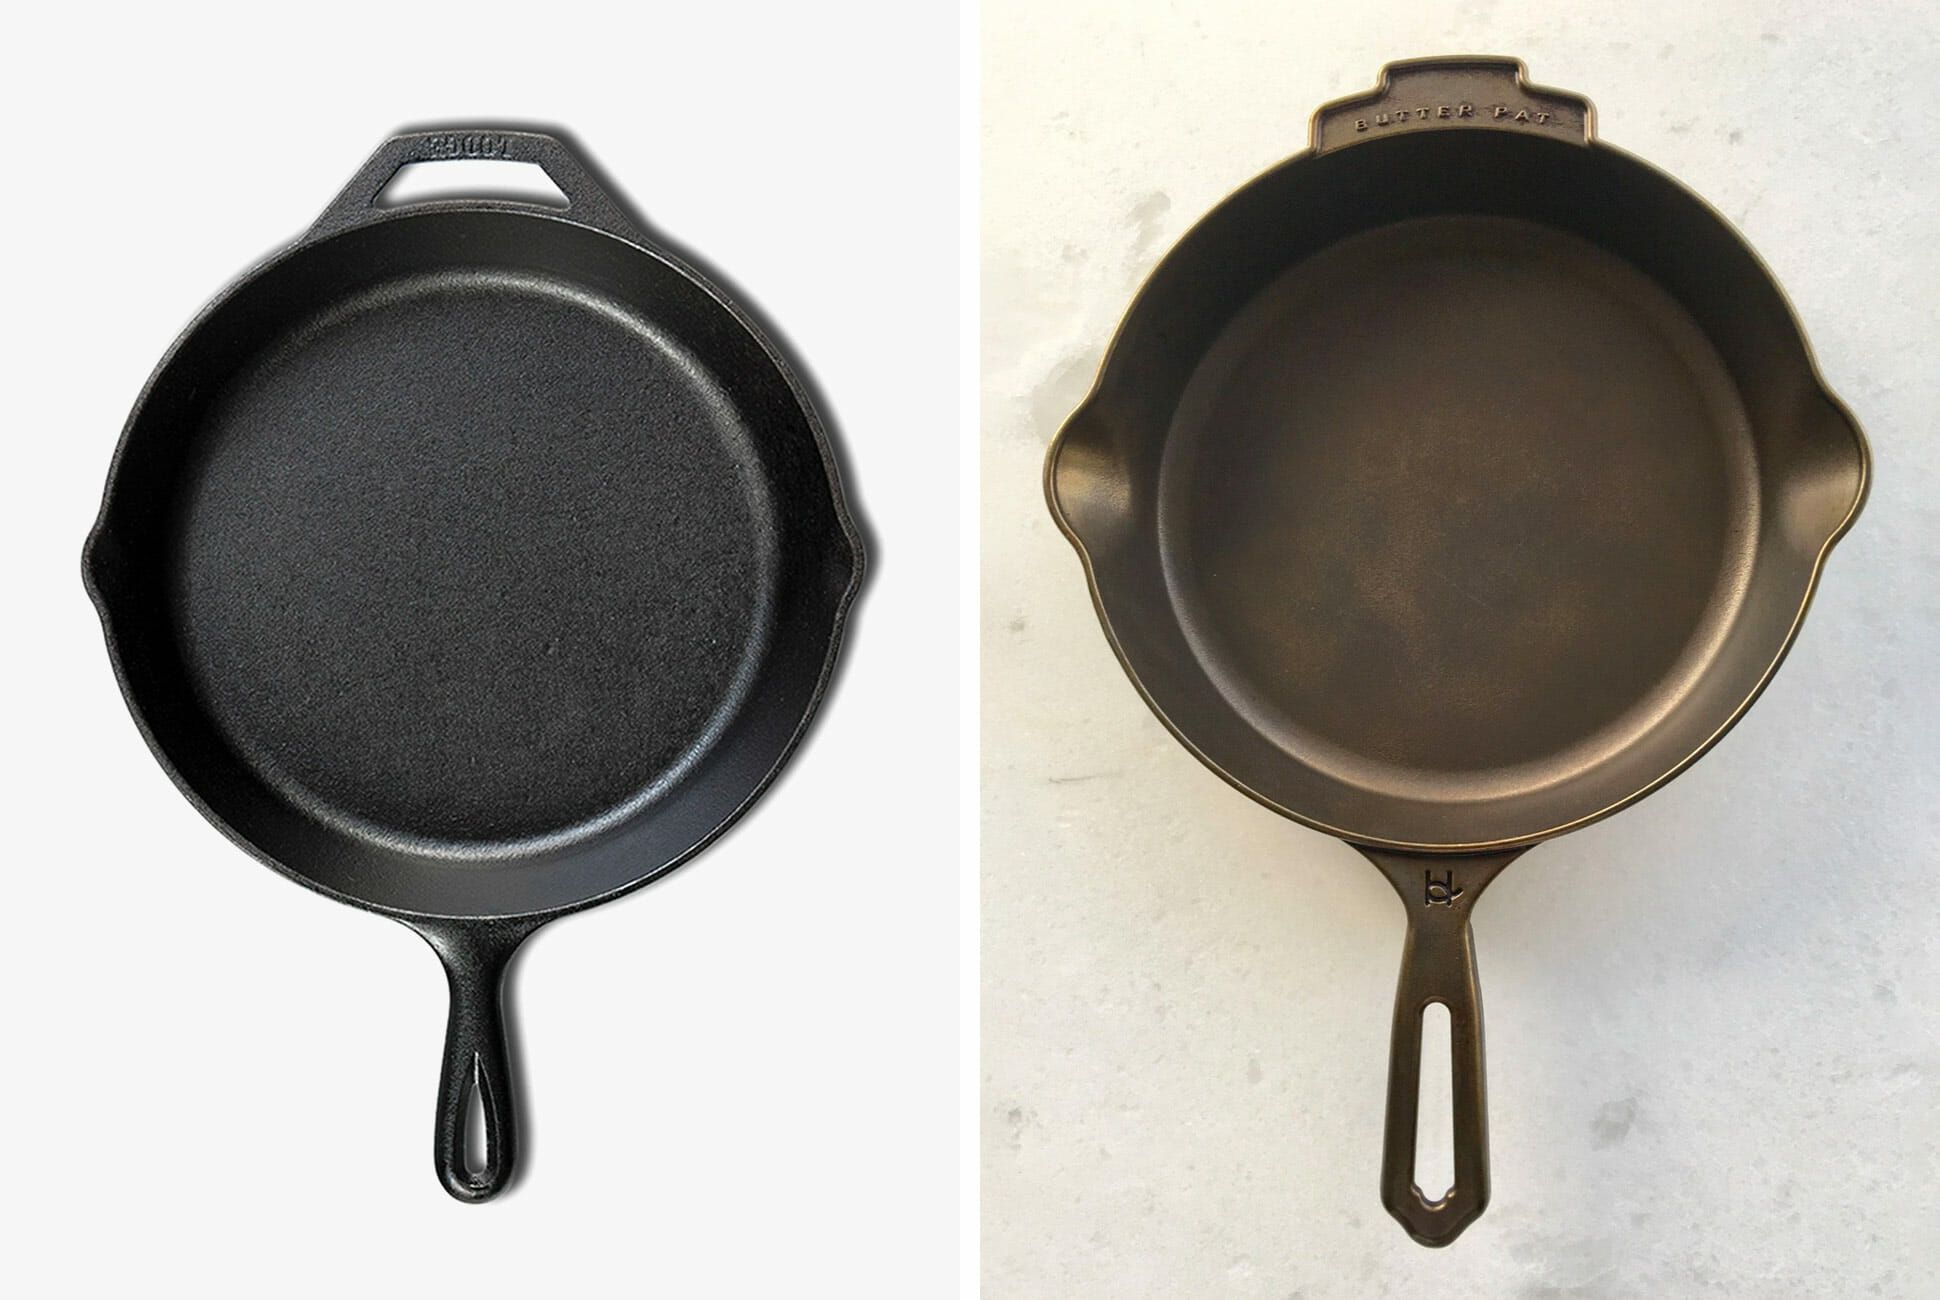 Differences between skillet and frying pan